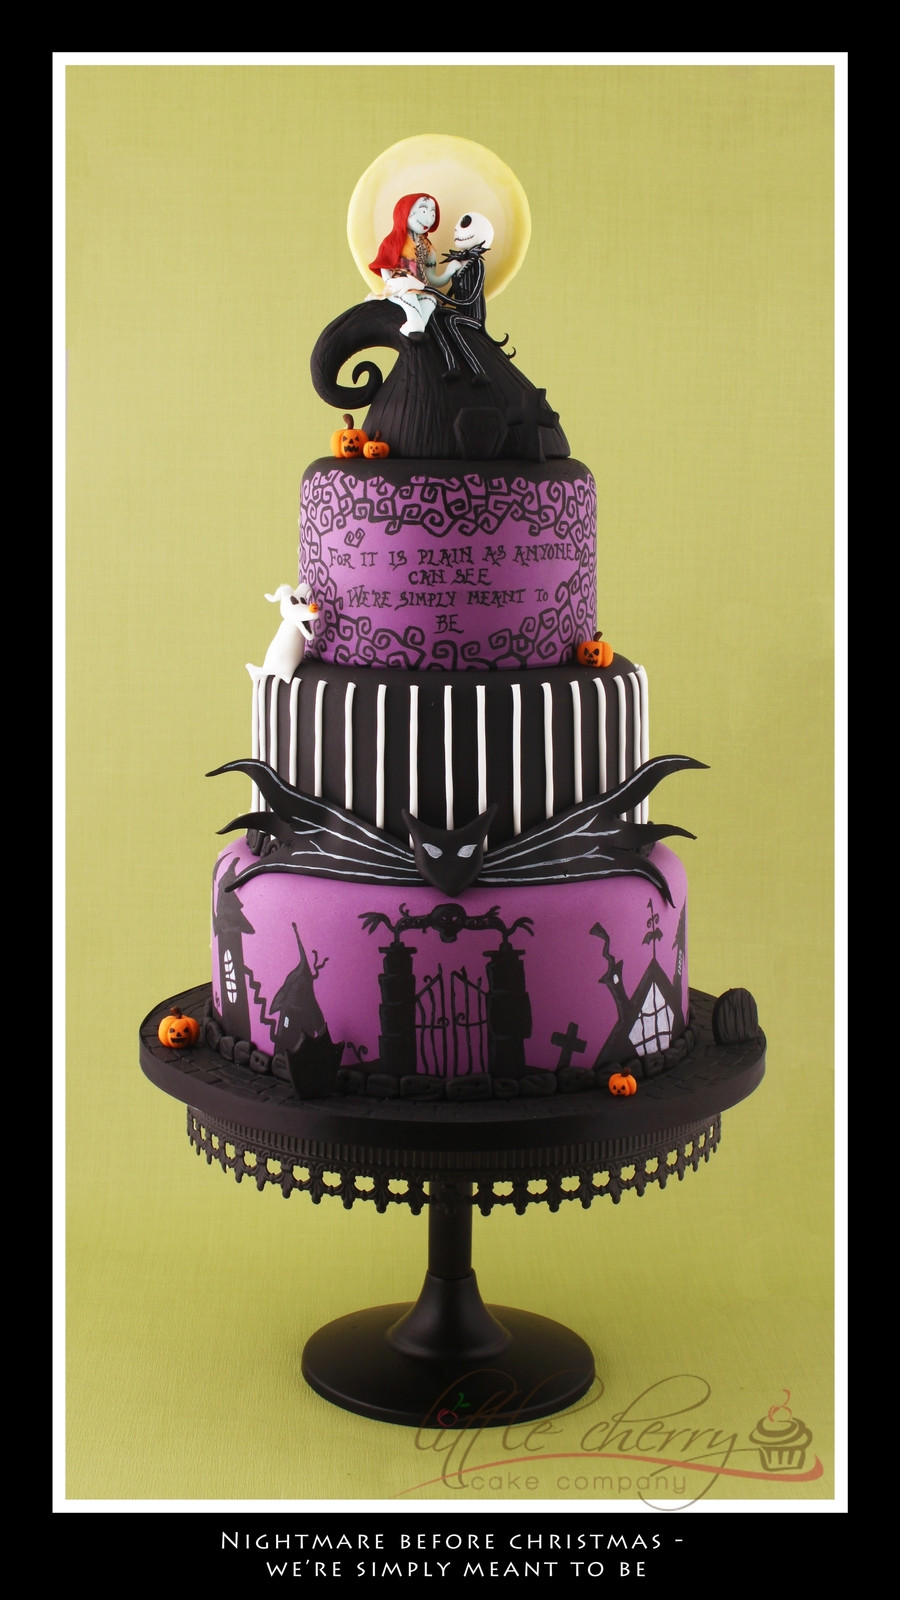 Nightmare Before Christmas Cakes Decorations
 Nightmare Before Christmas Wedding Cake CakeCentral